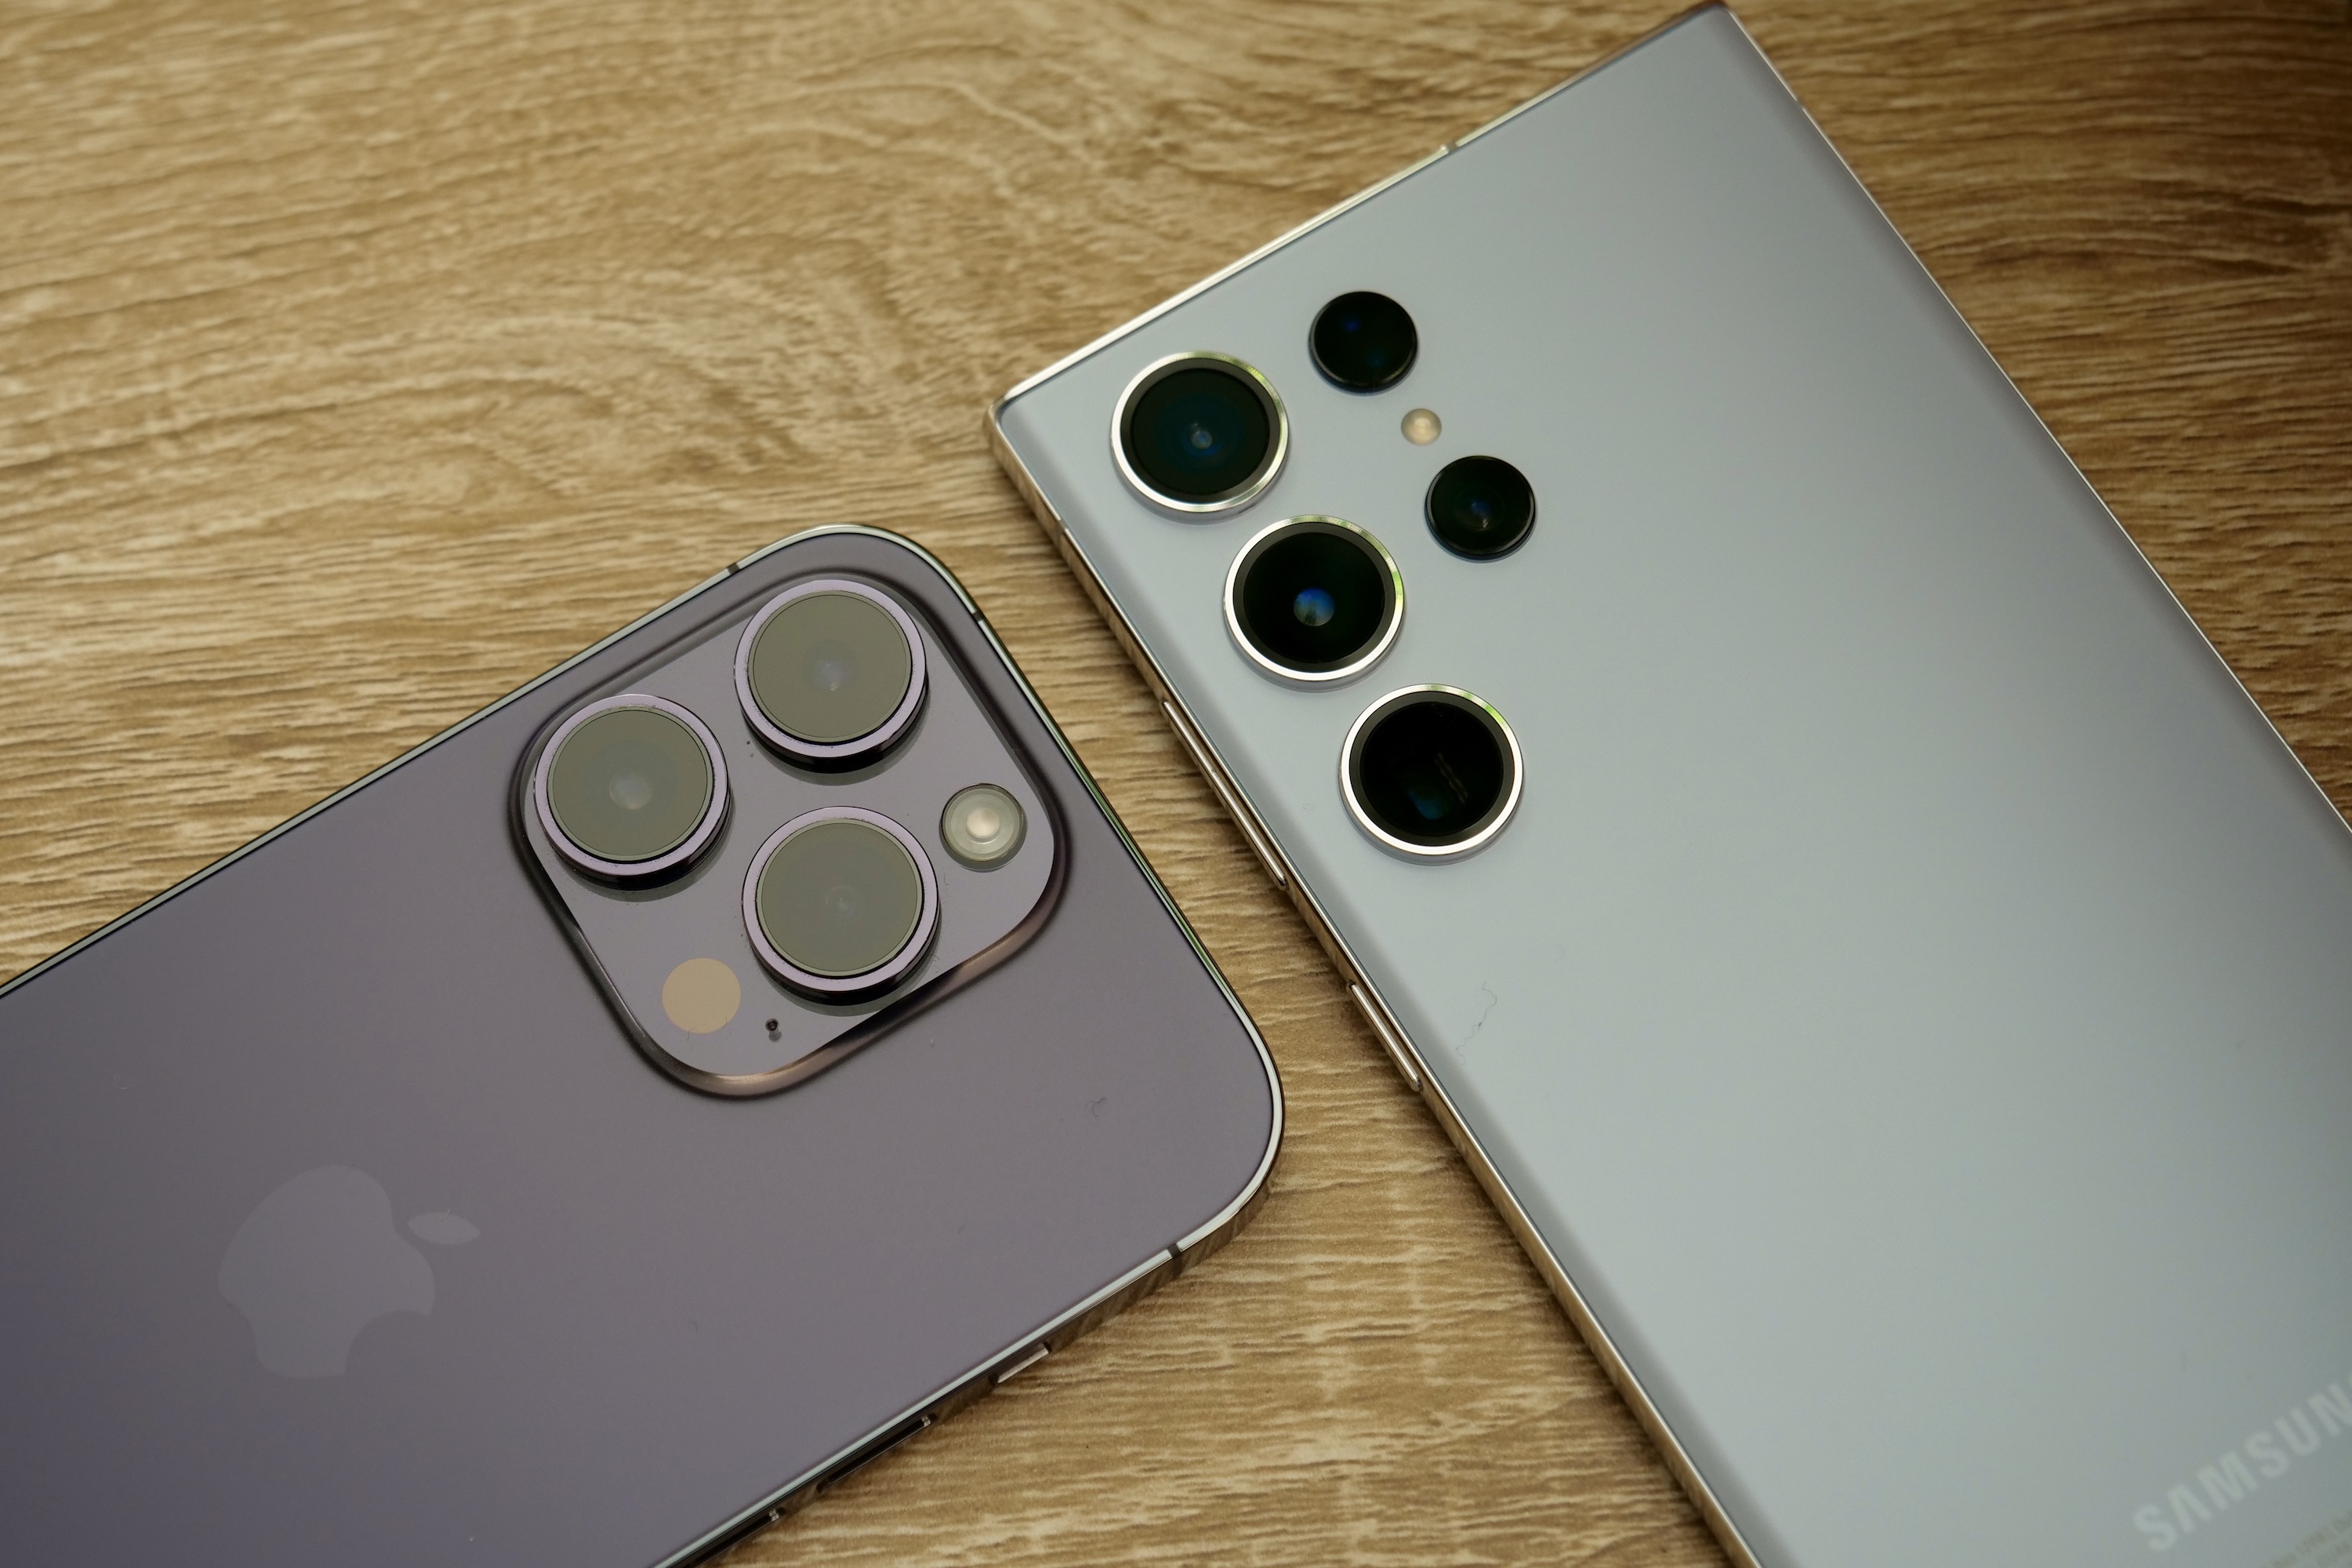 The iPhone 14 Pro and Galaxy S23 Ultra's camera modules.